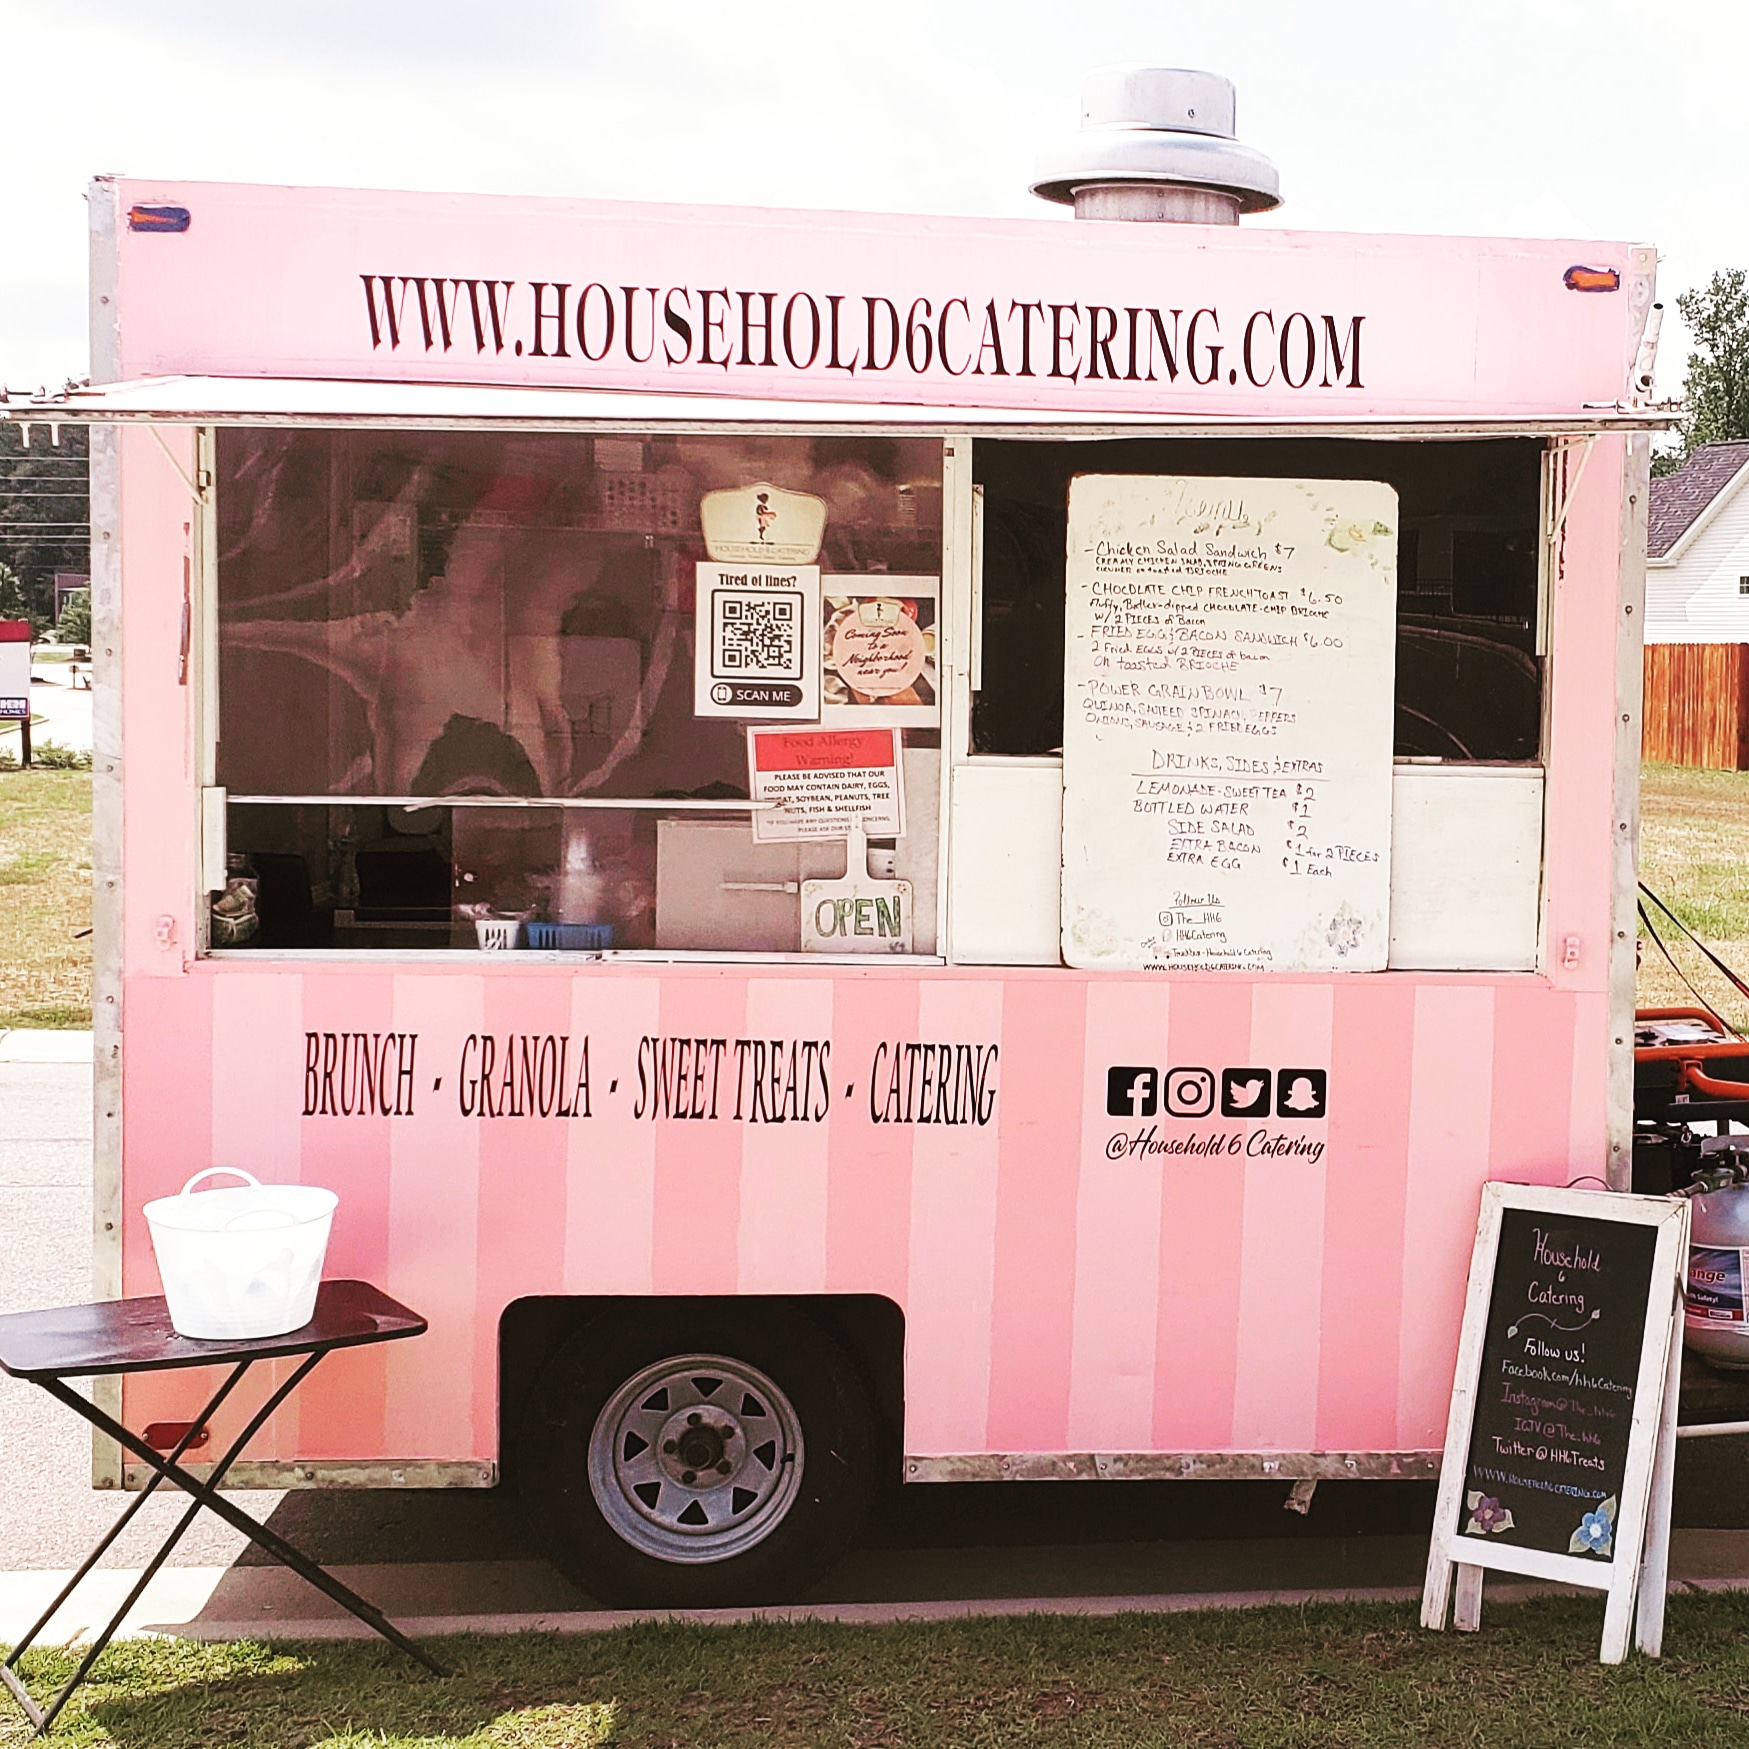 Household 6 Catering, LLC. food truck profile image